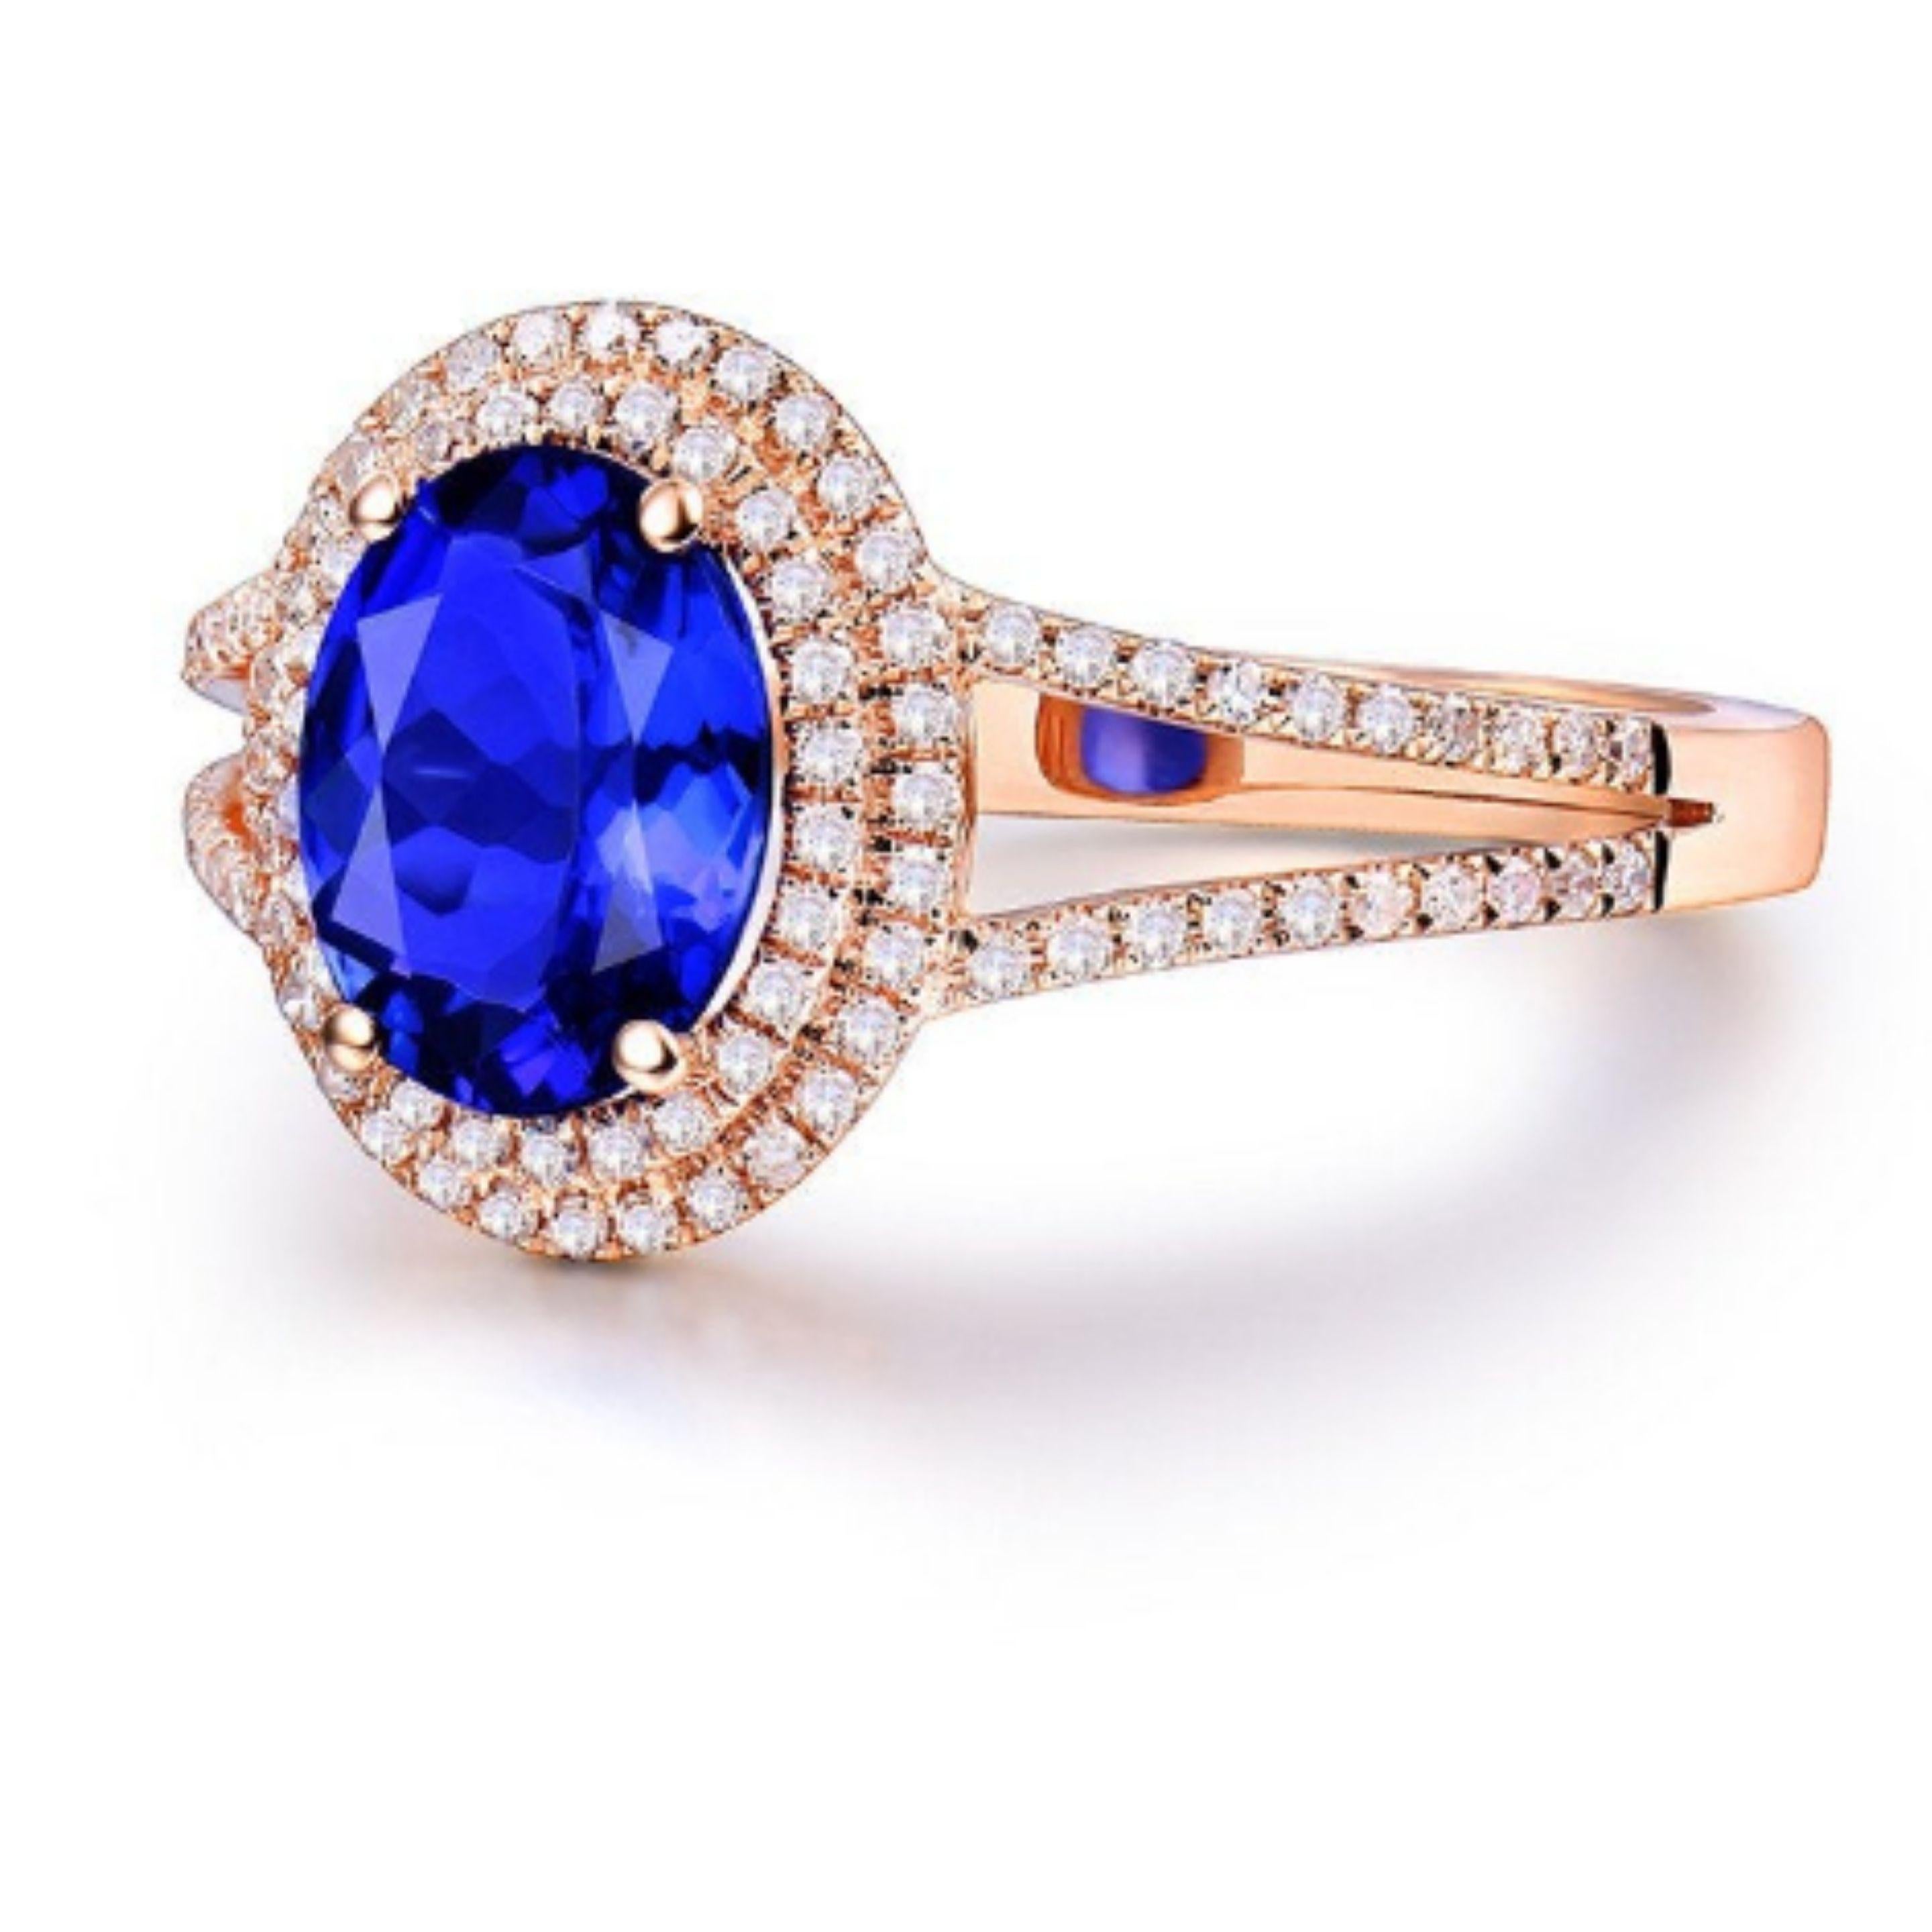 14K ROSE GOLD TANZANITE DIAMOND  RING 



THIS IS A UNIQUE TANZANITE RING WITH  102 DIAMONDS REALLY STANDS OUT IN THE 14K ROSE GOLD .AND IF YOU WANT WHITE  YELLOW FOLD LET US KNOW OR NEED A DIFFERNT SIZE

Diamonds: Natural Diamonds
Carat Weight: